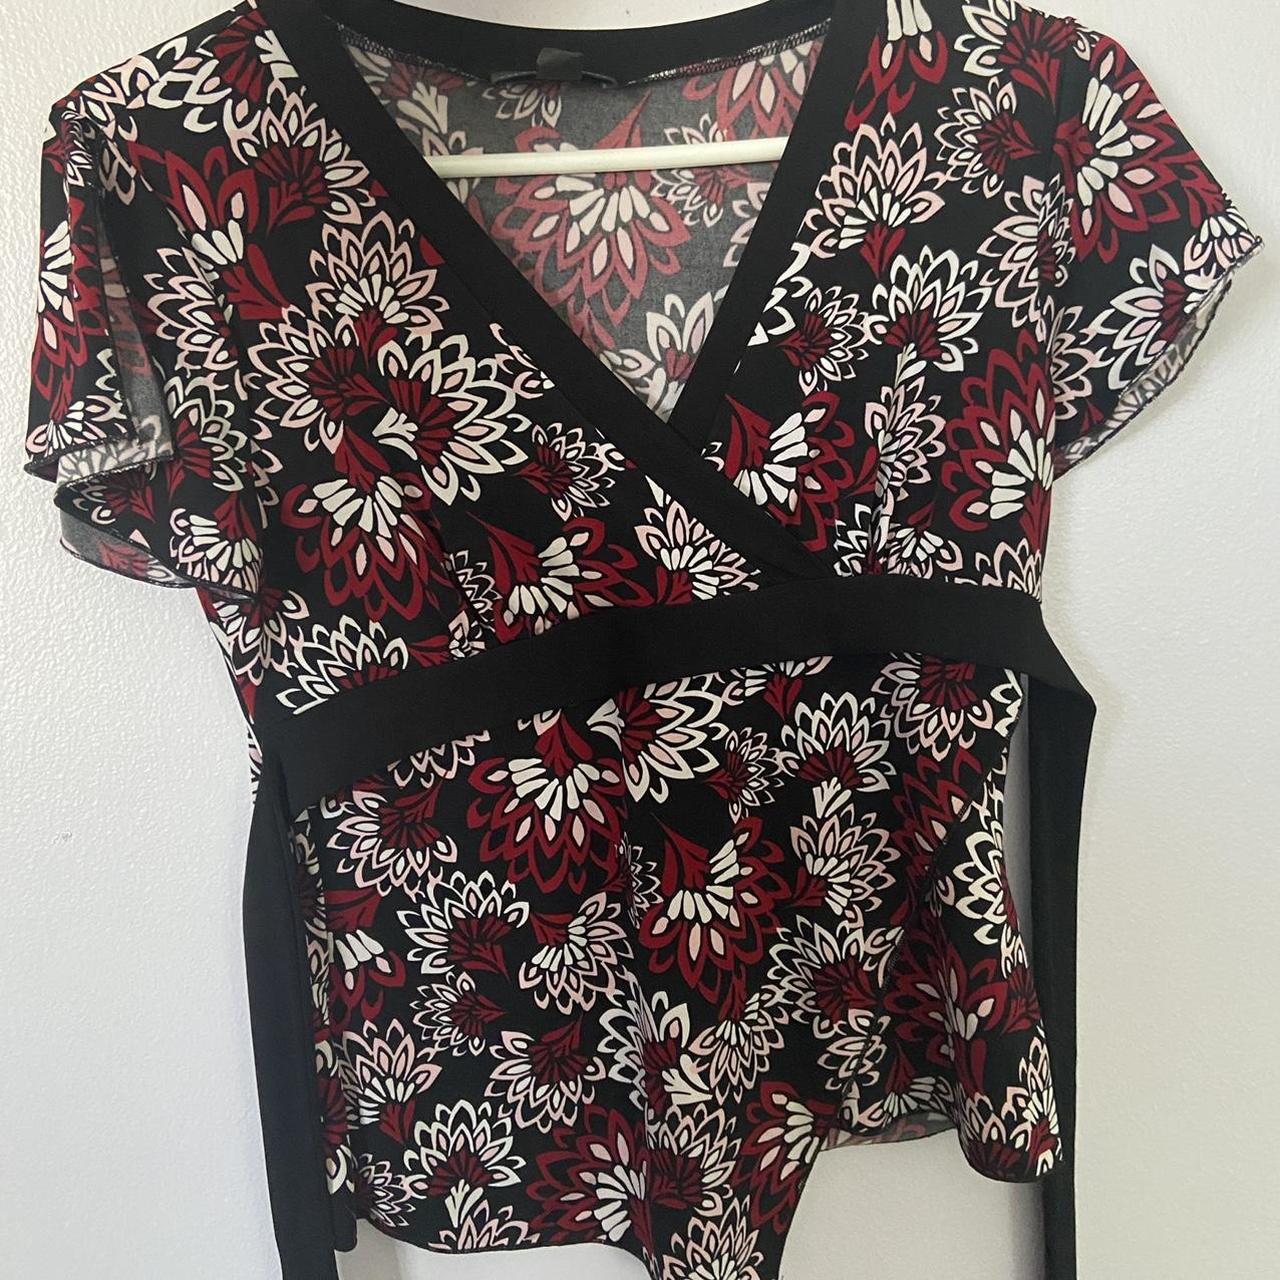 Product Image 2 - Cute flower print top. Has